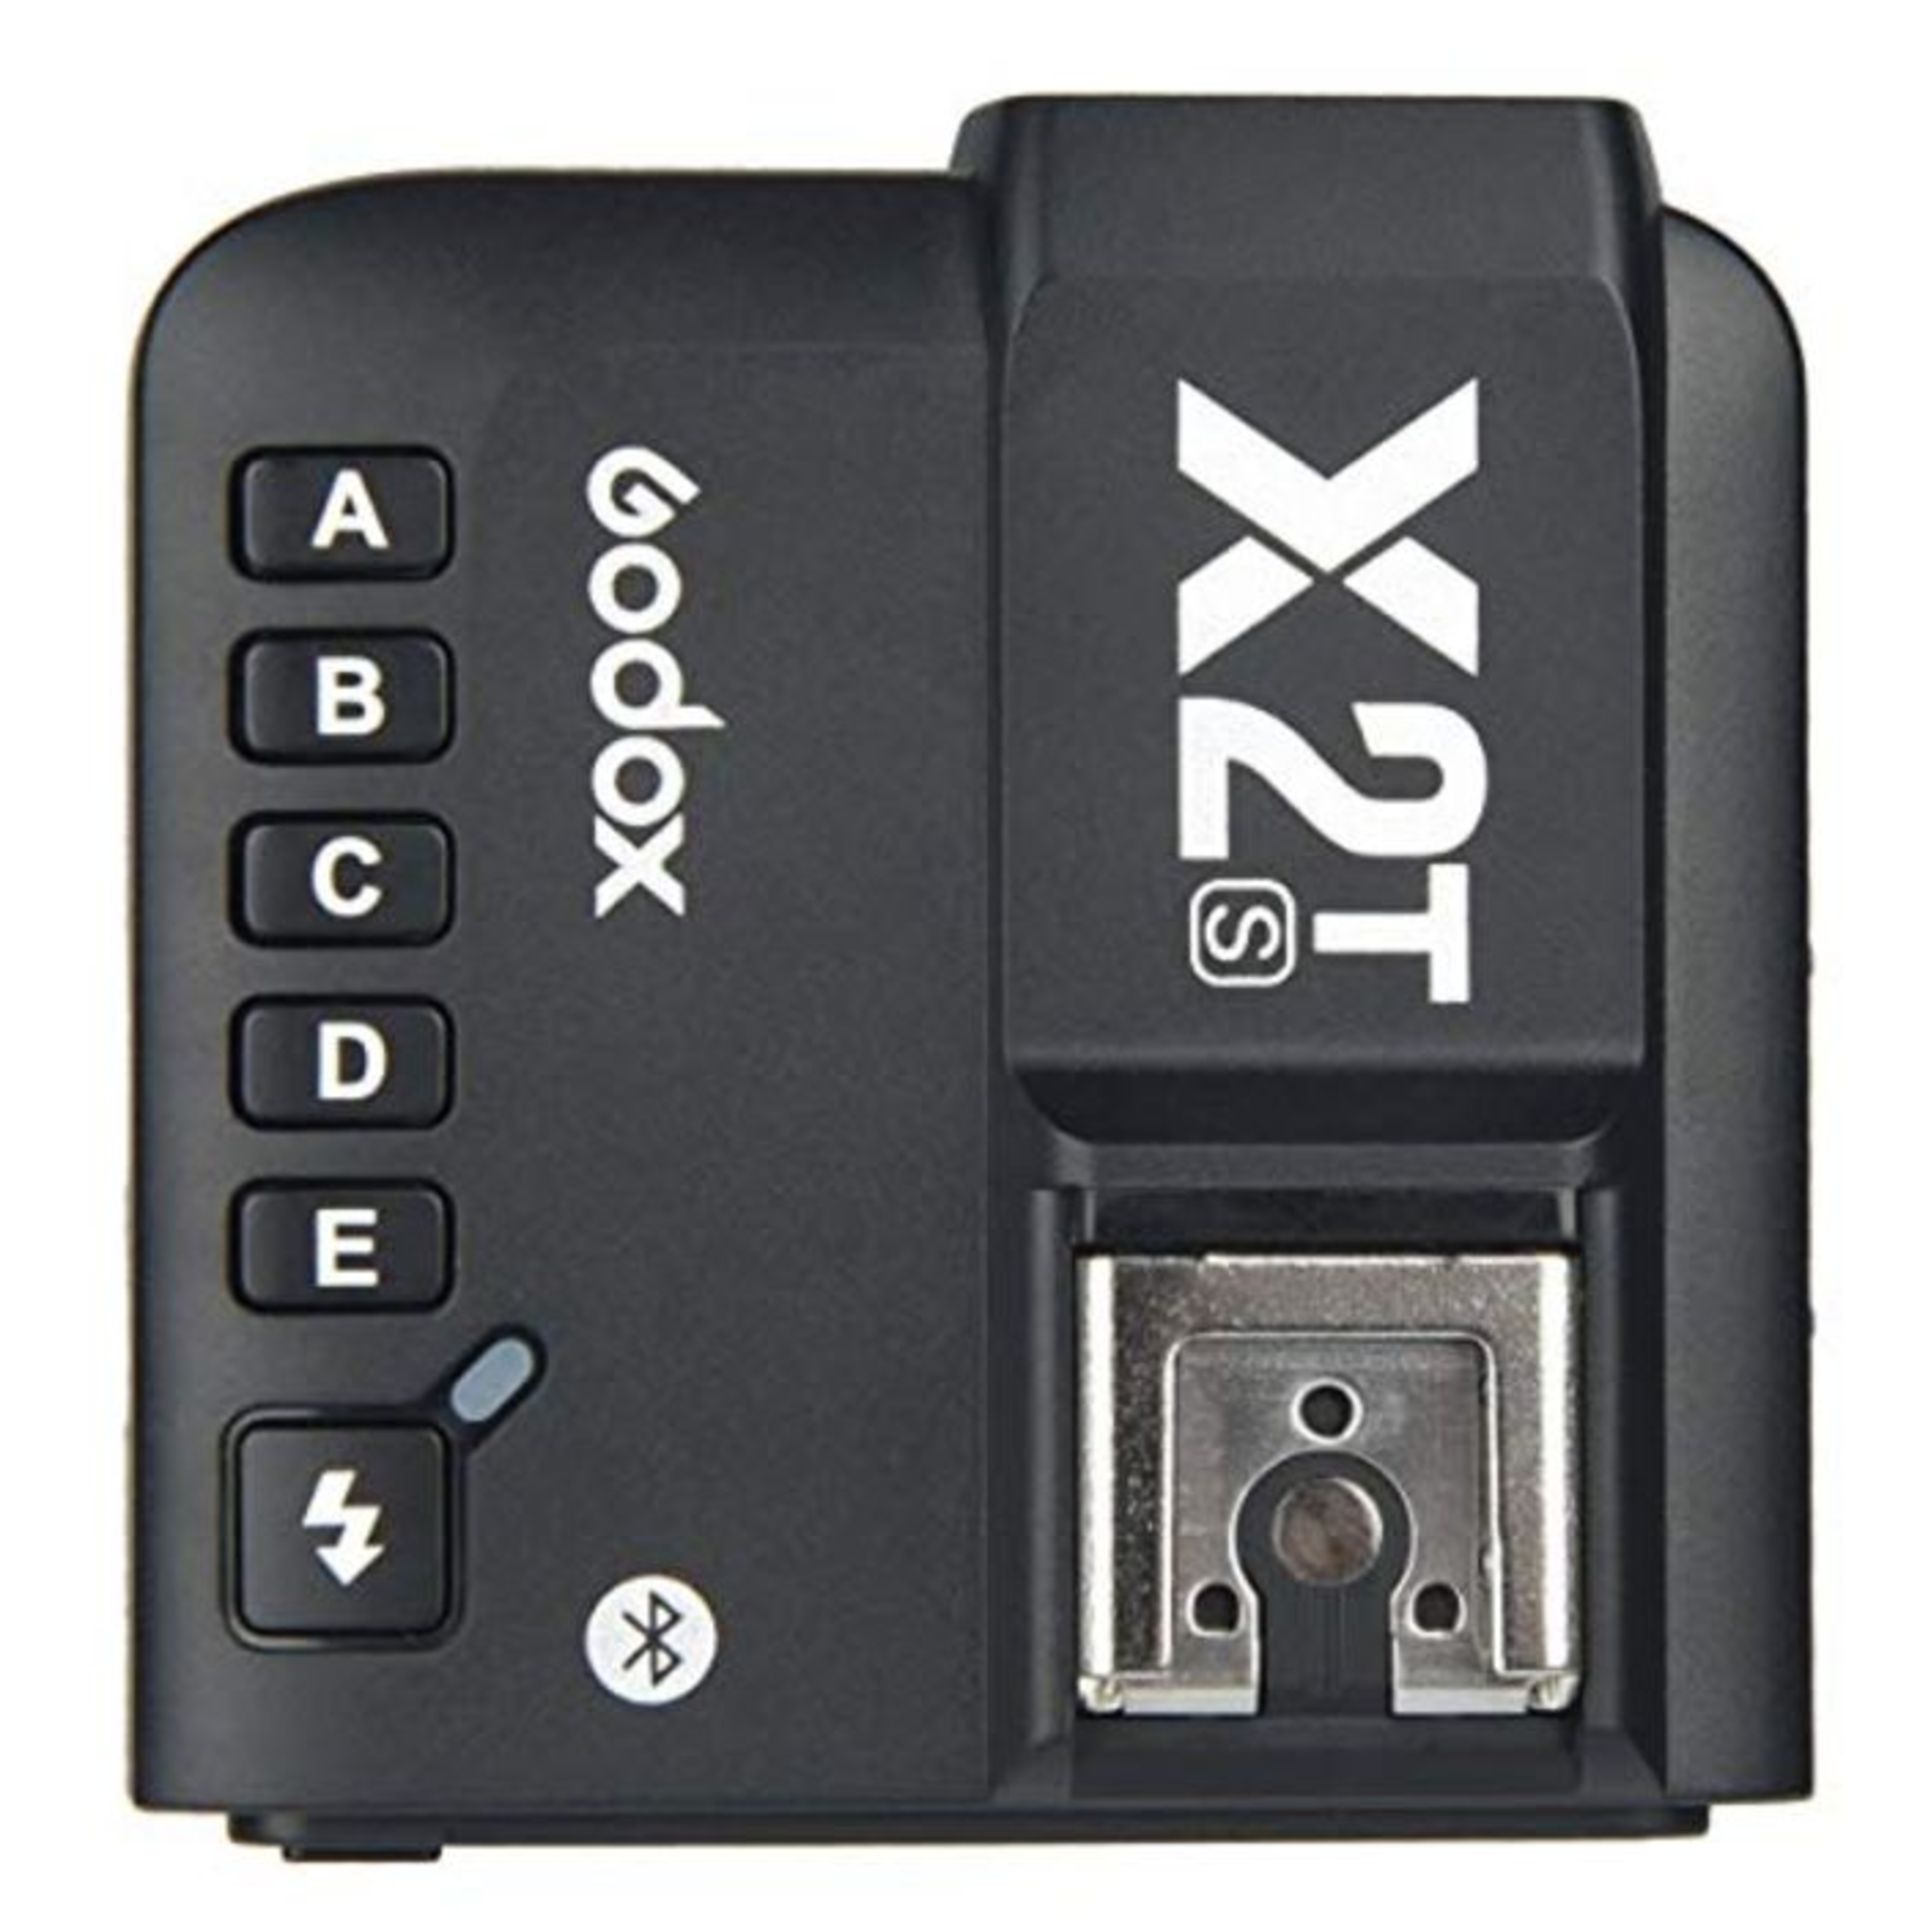 Godox X2T-S TTL Wireless Flash Trigger for Sony, Support 1/8000s HSS Function, 5 Dedic